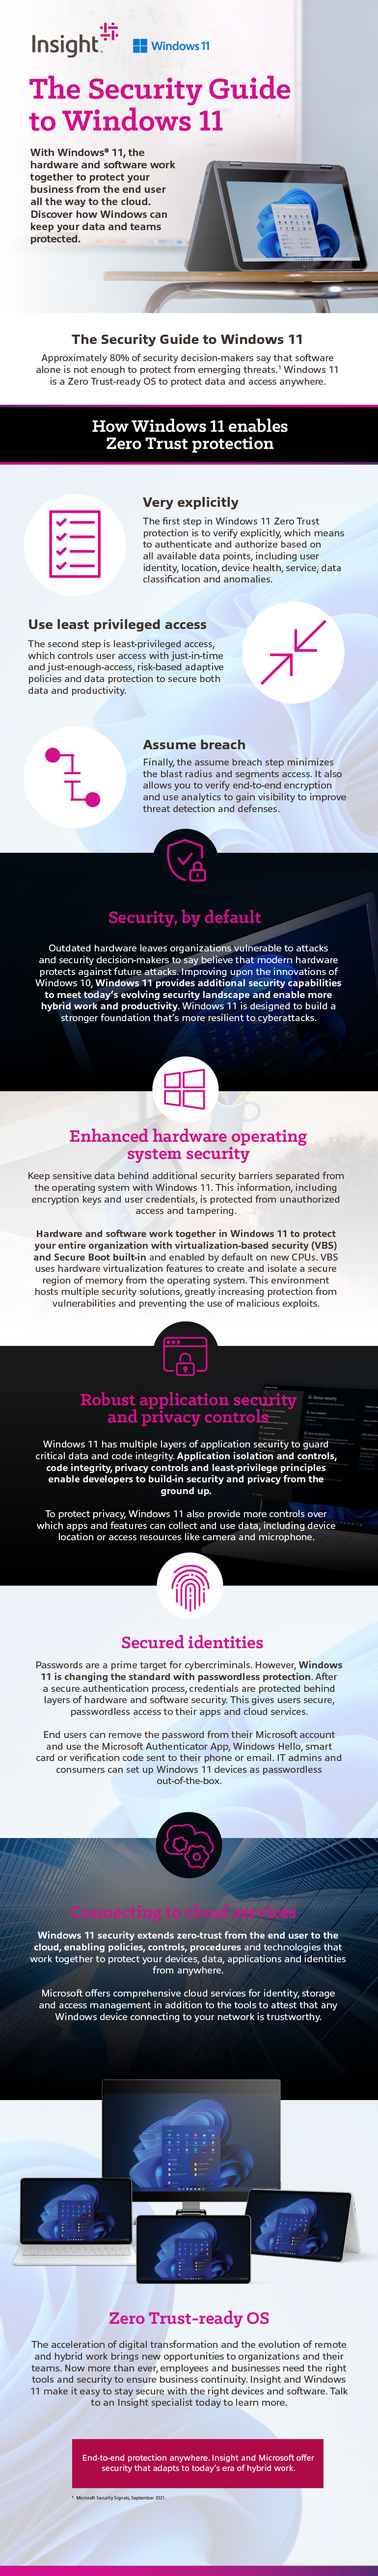 The Security Guide to Windows 11 infographic